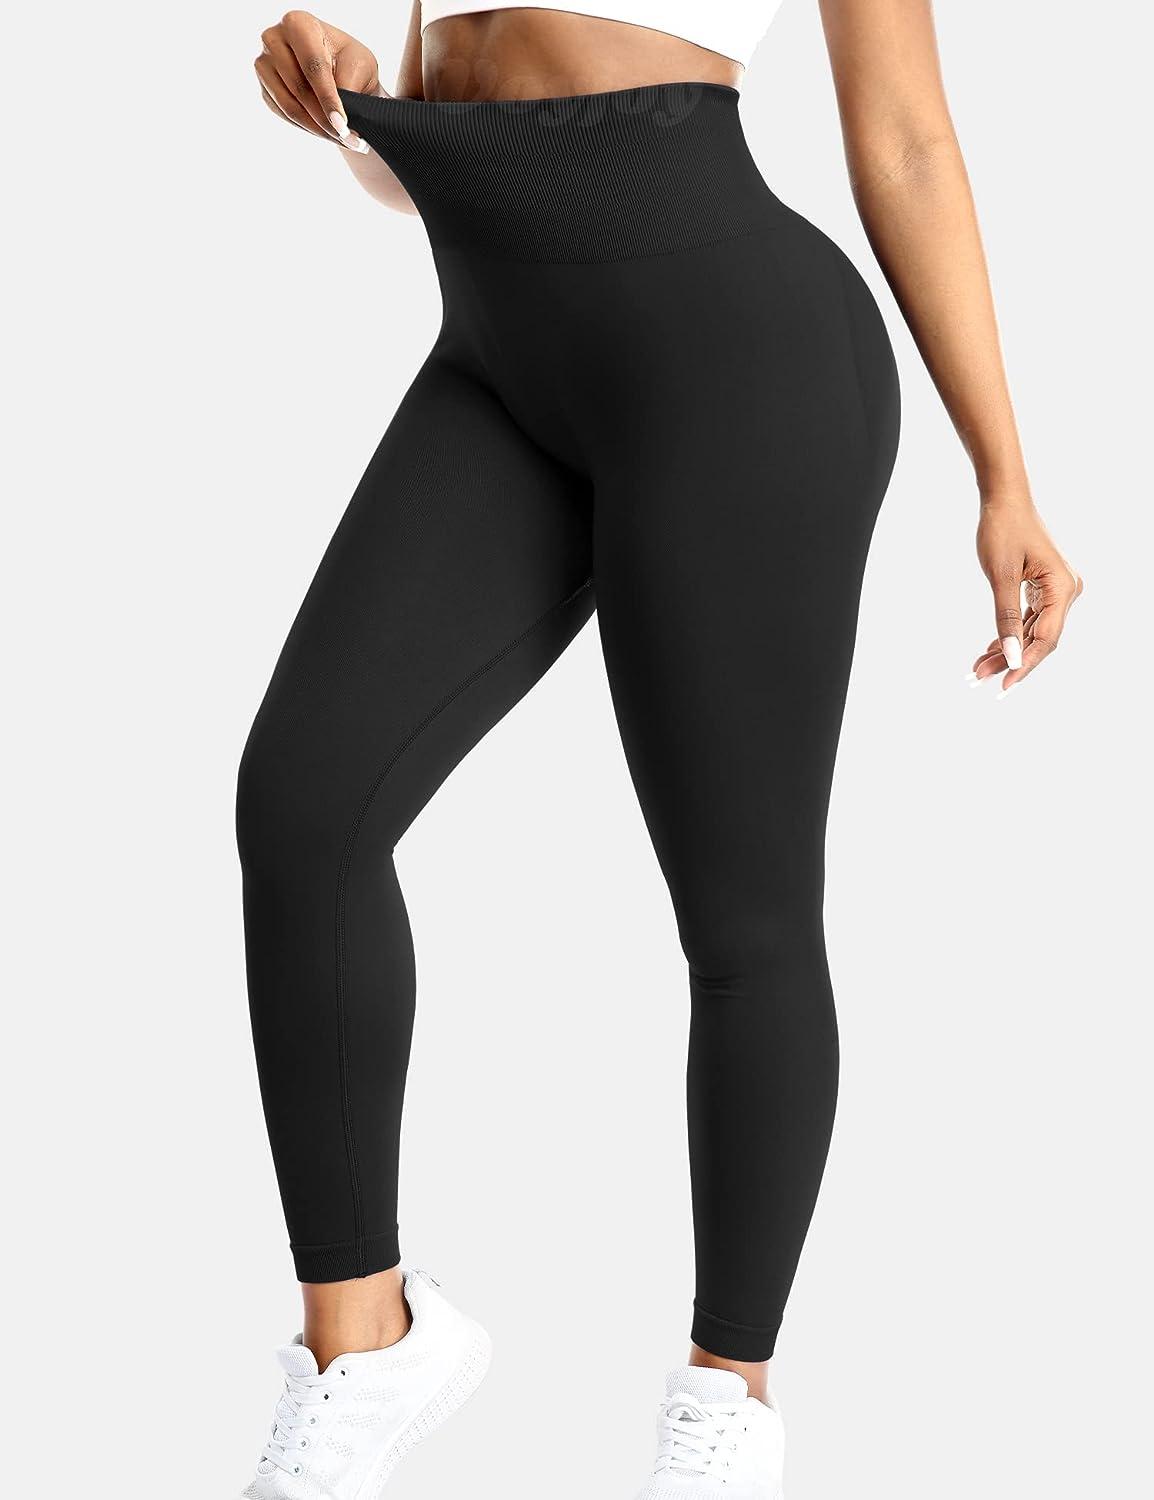 Your Orders Placed Leggings for Women Butt Lift Amplify Seamless